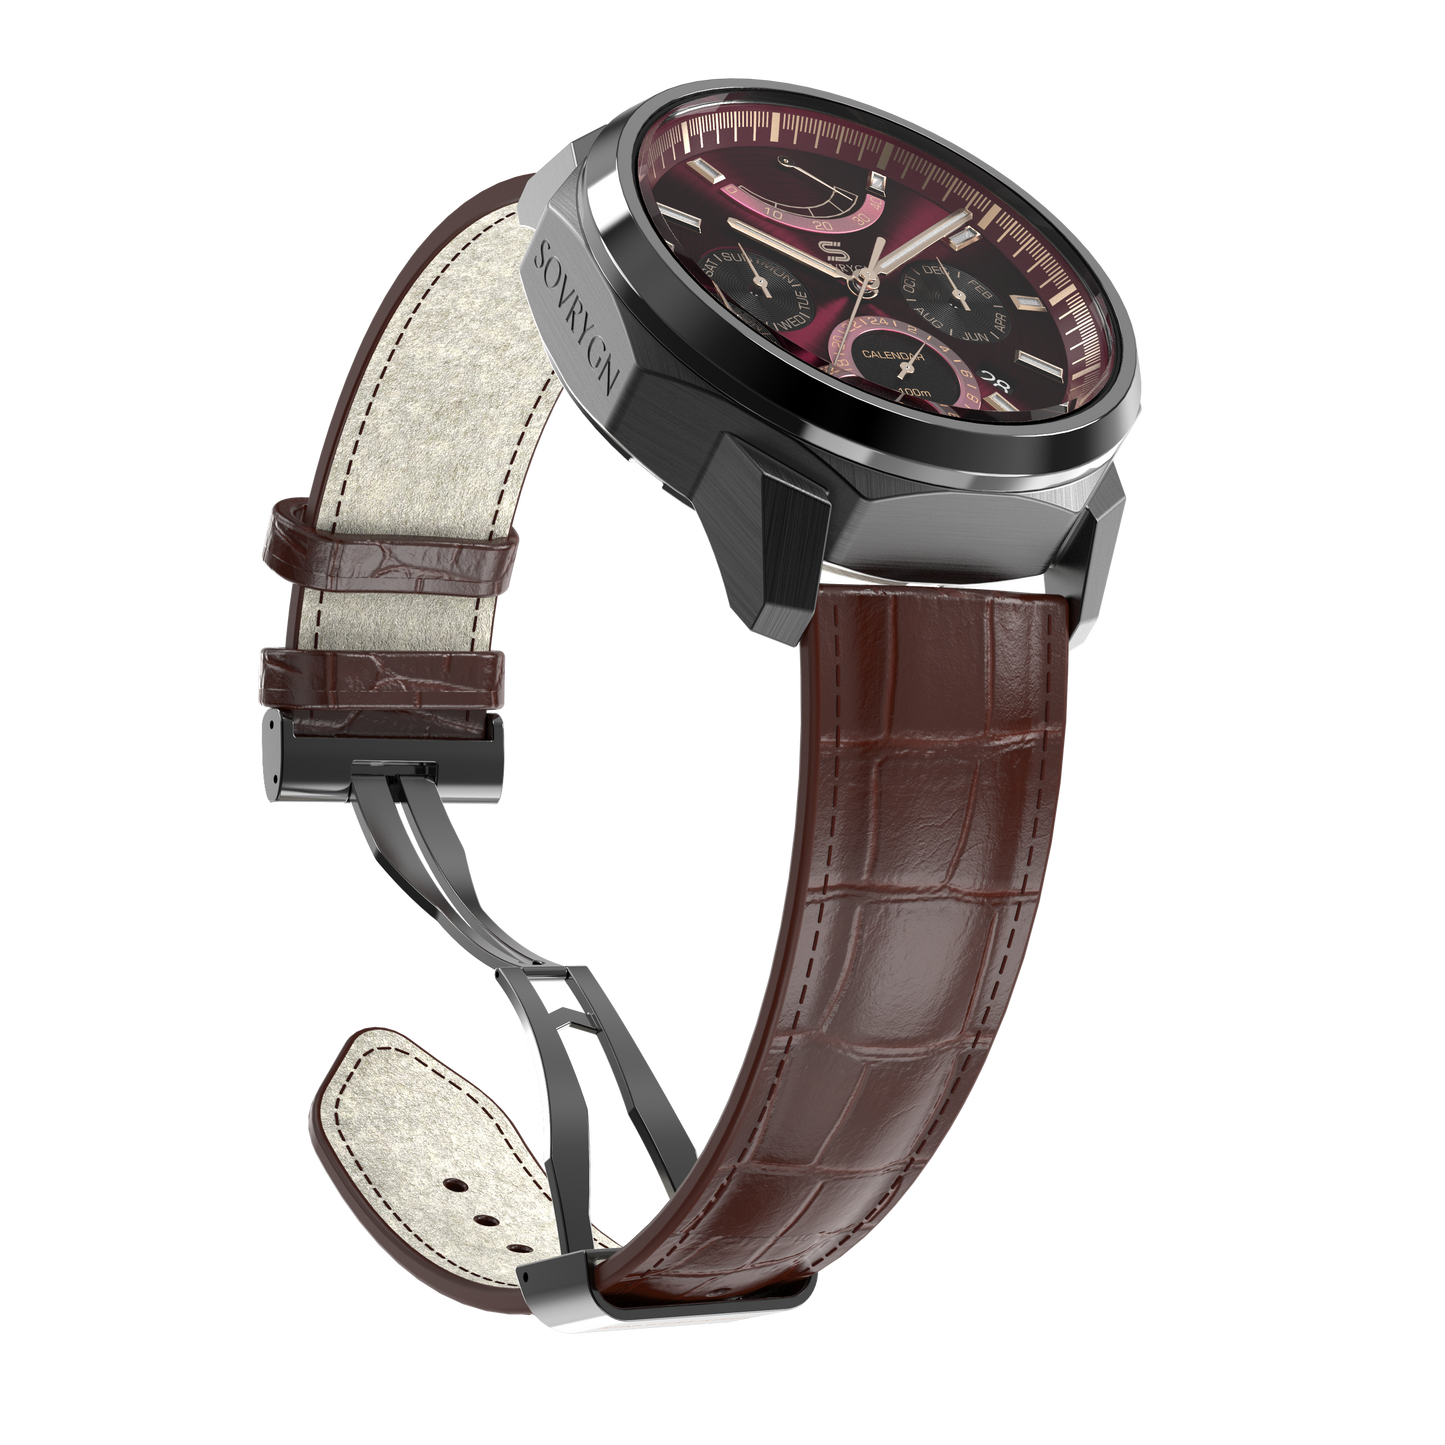 SOVRYGN Brown leather strap with silver deployment clasp